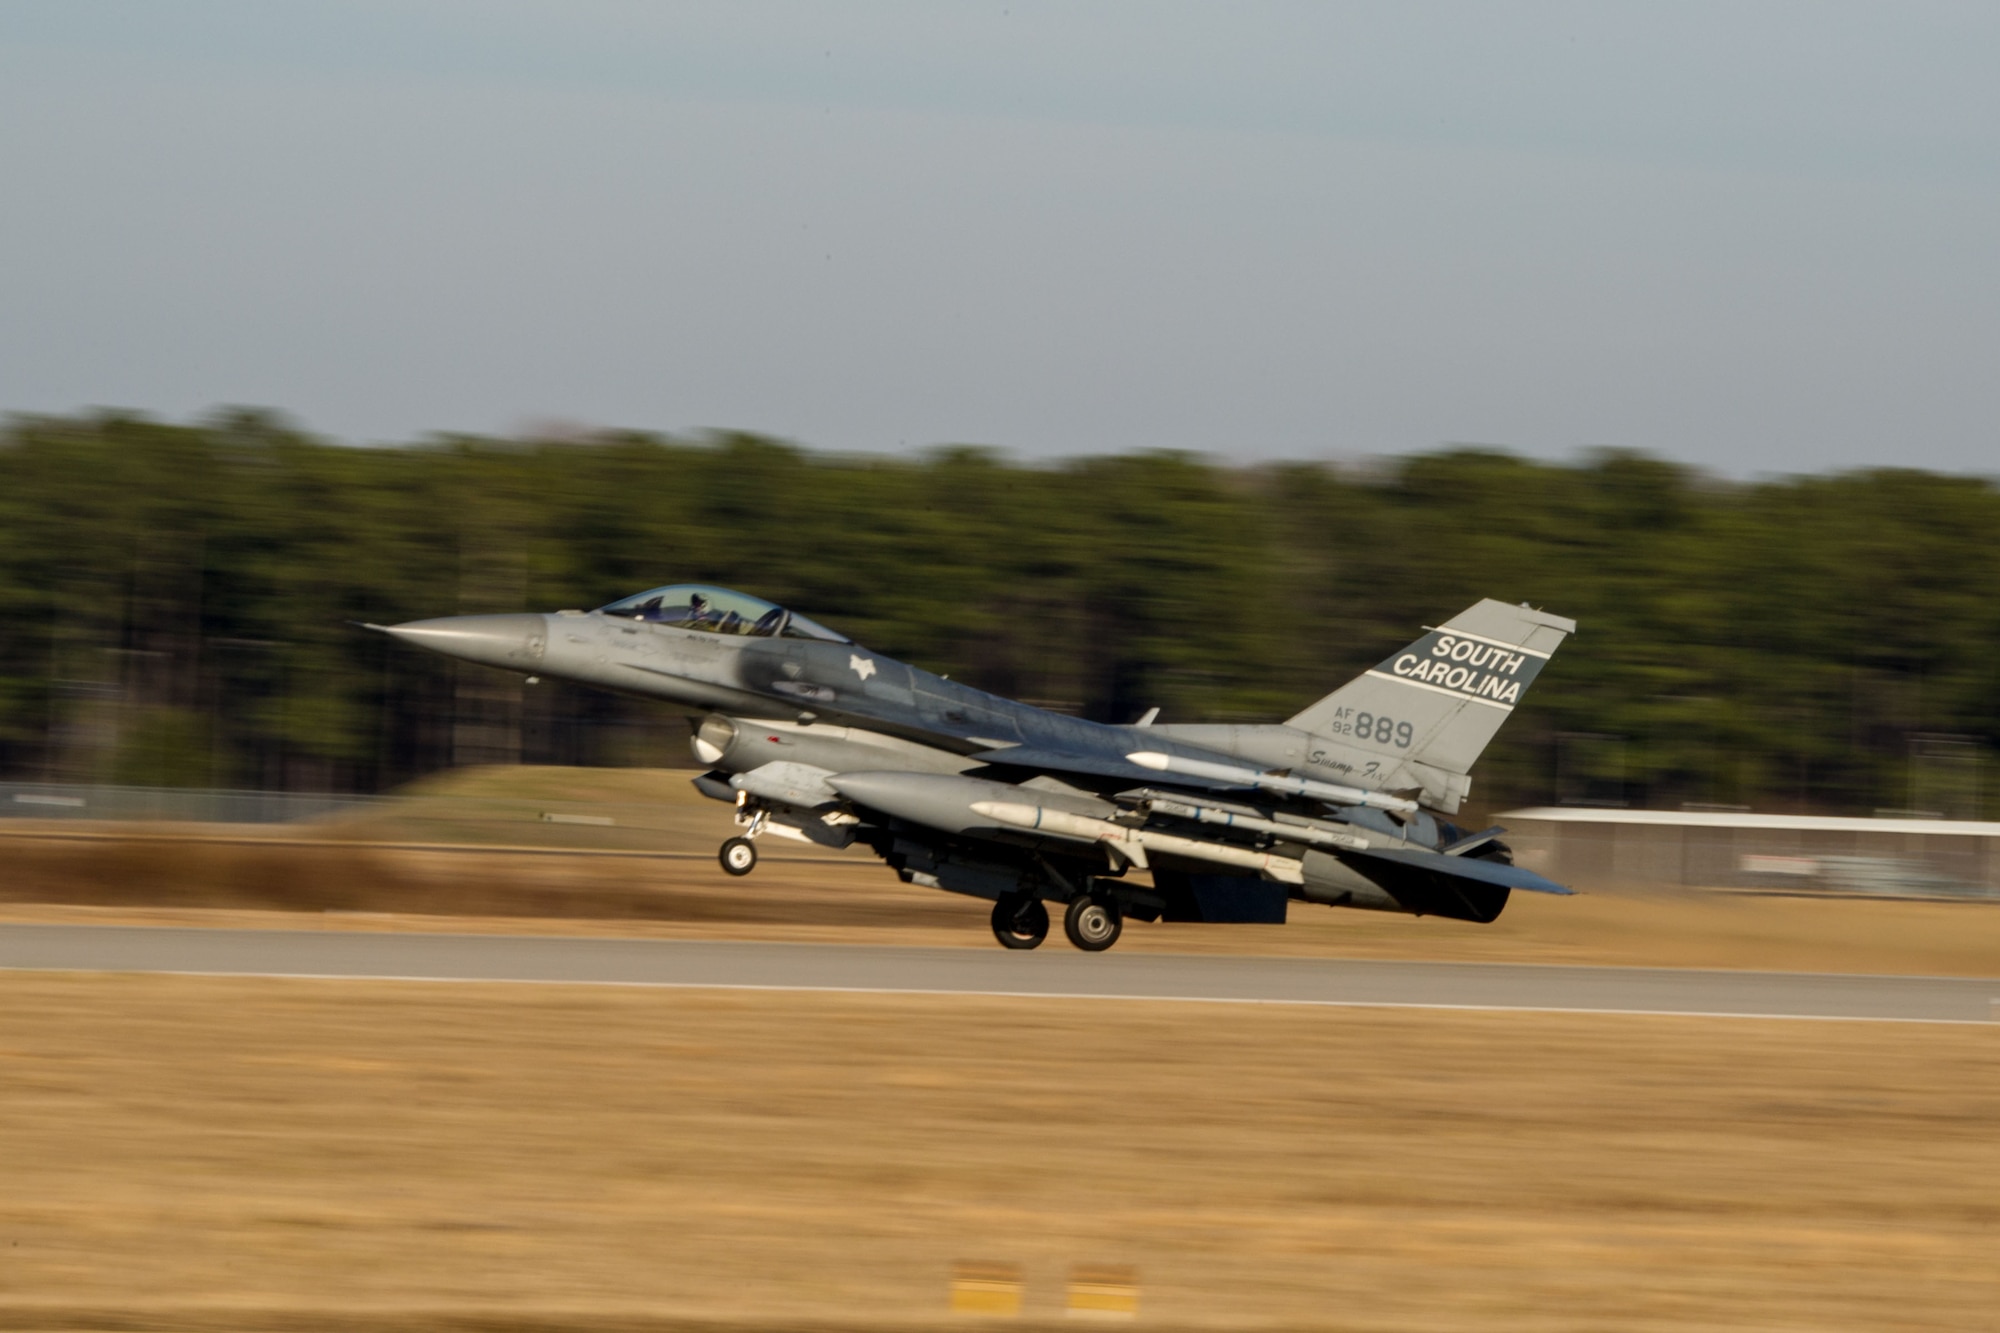 A U.S. Air Force F-16 fighter jet, assigned to the 169th Fighter Wing, lands during surge flying operations, Feb. 7, 2015, at McEntire Joint National Guard Base, S.C. The surge encompasses high tempo flying as part of vital training in preparation for deployments. (U.S. Air National Guard photo by Tech. Sgt. Jorge Intriago/Released)